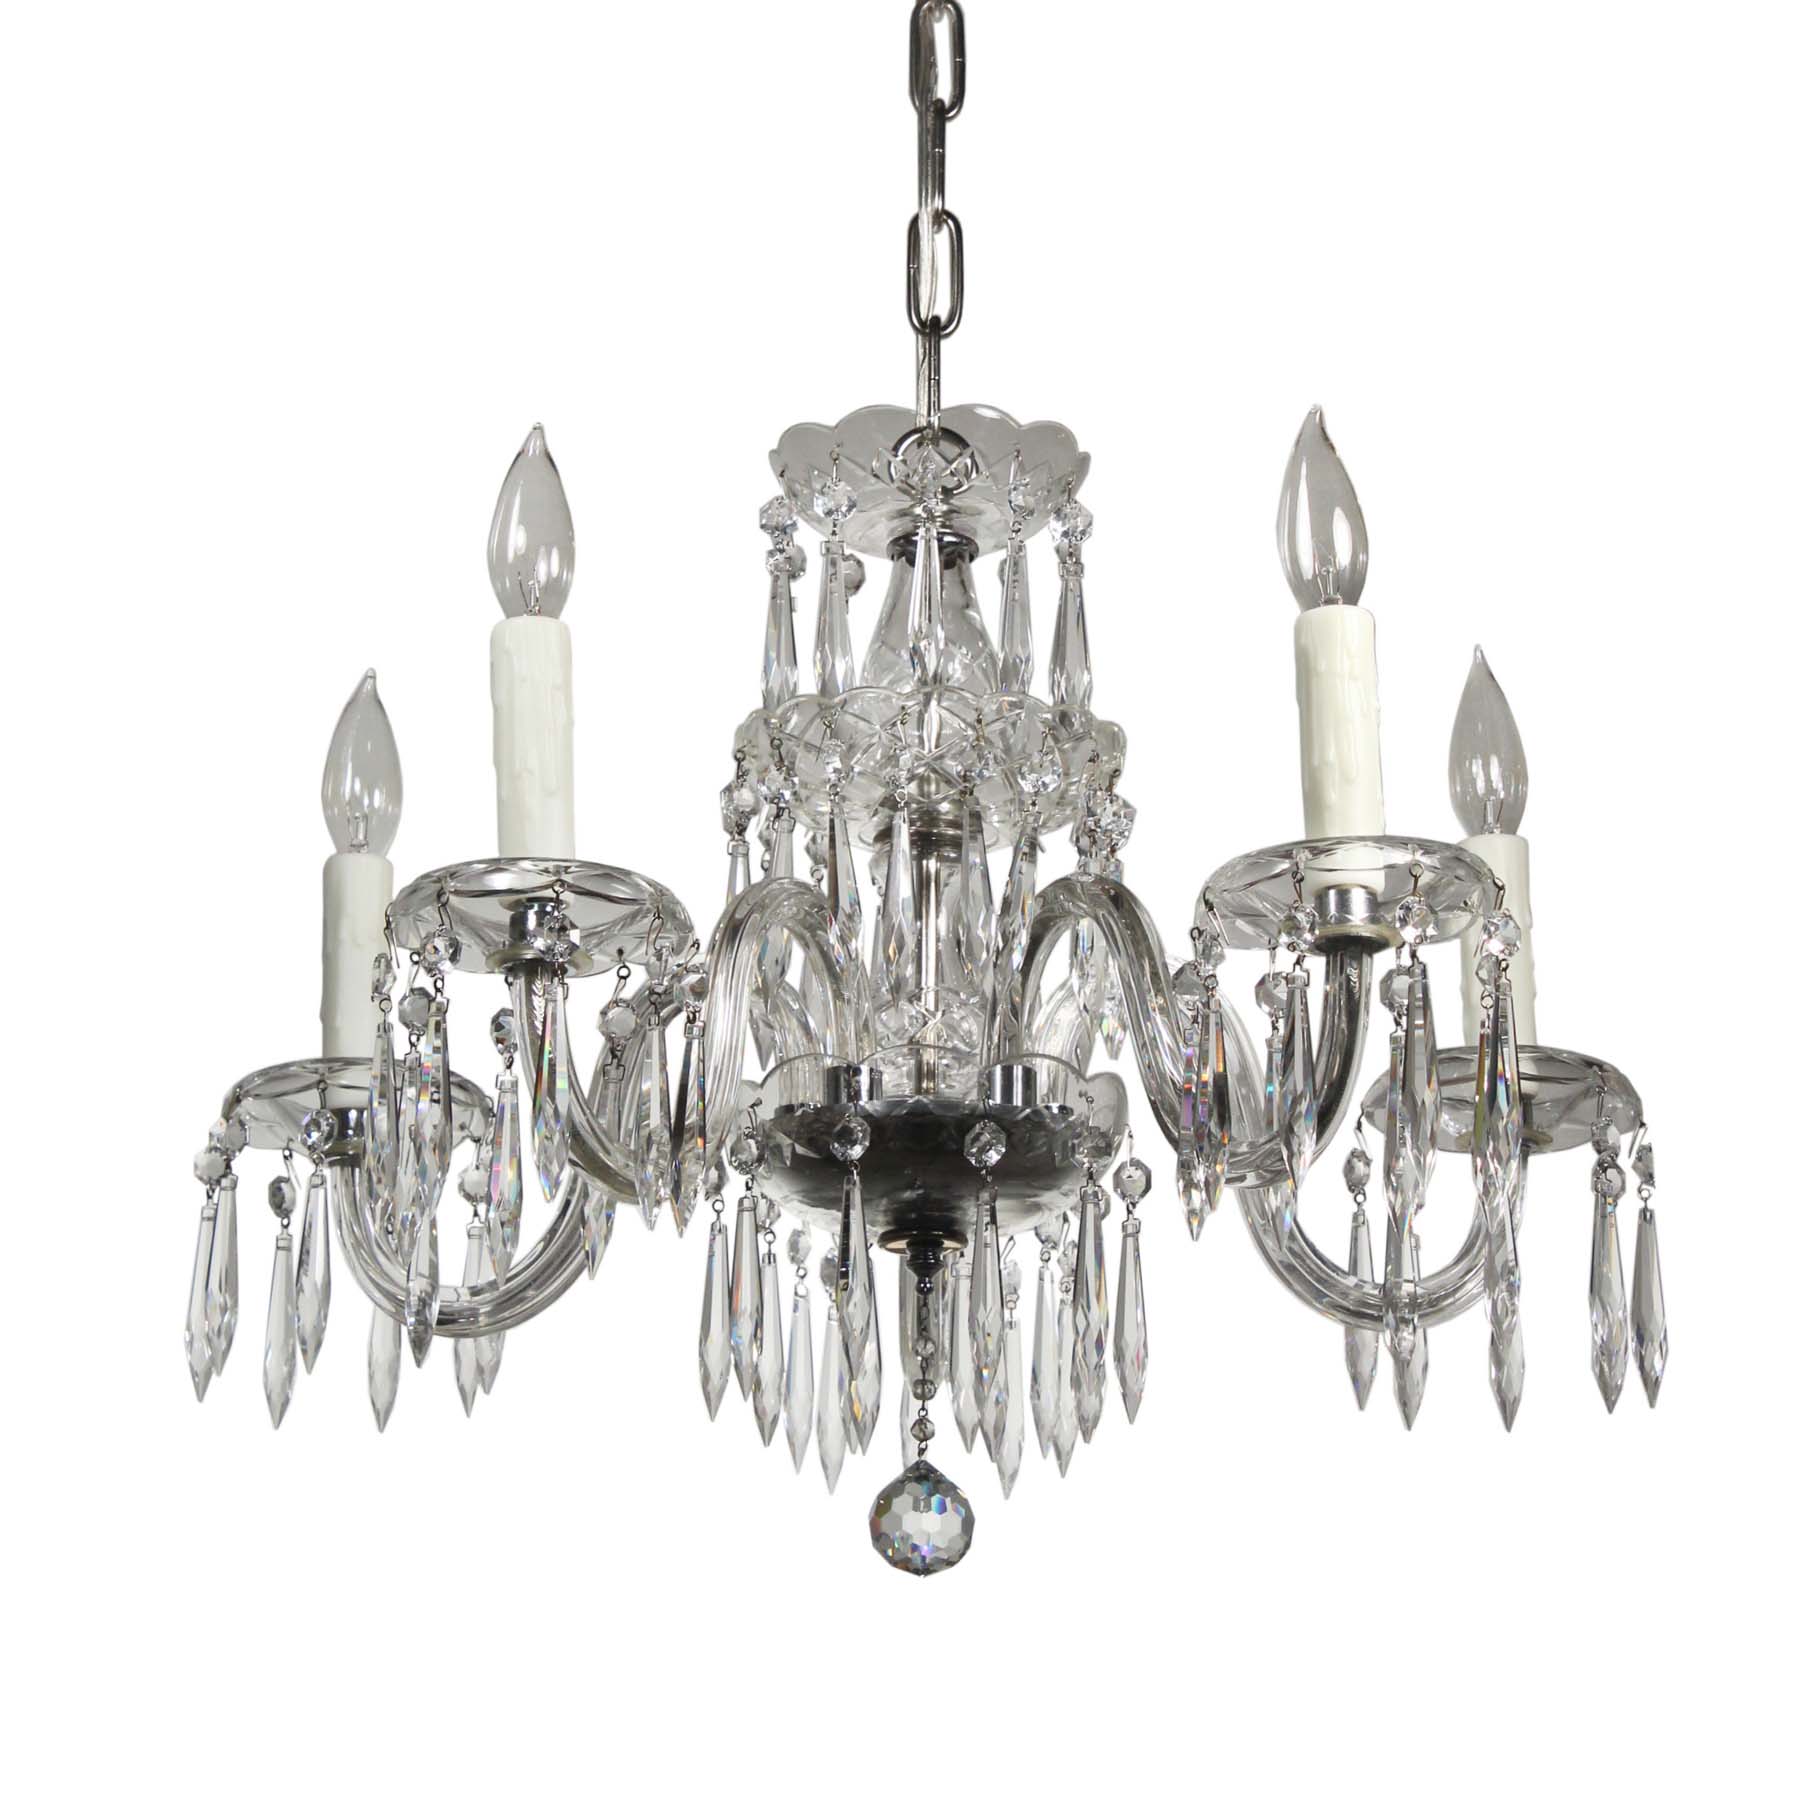 SOLD Five-Light Glass Chandelier with Prisms, Antique Lighting-0